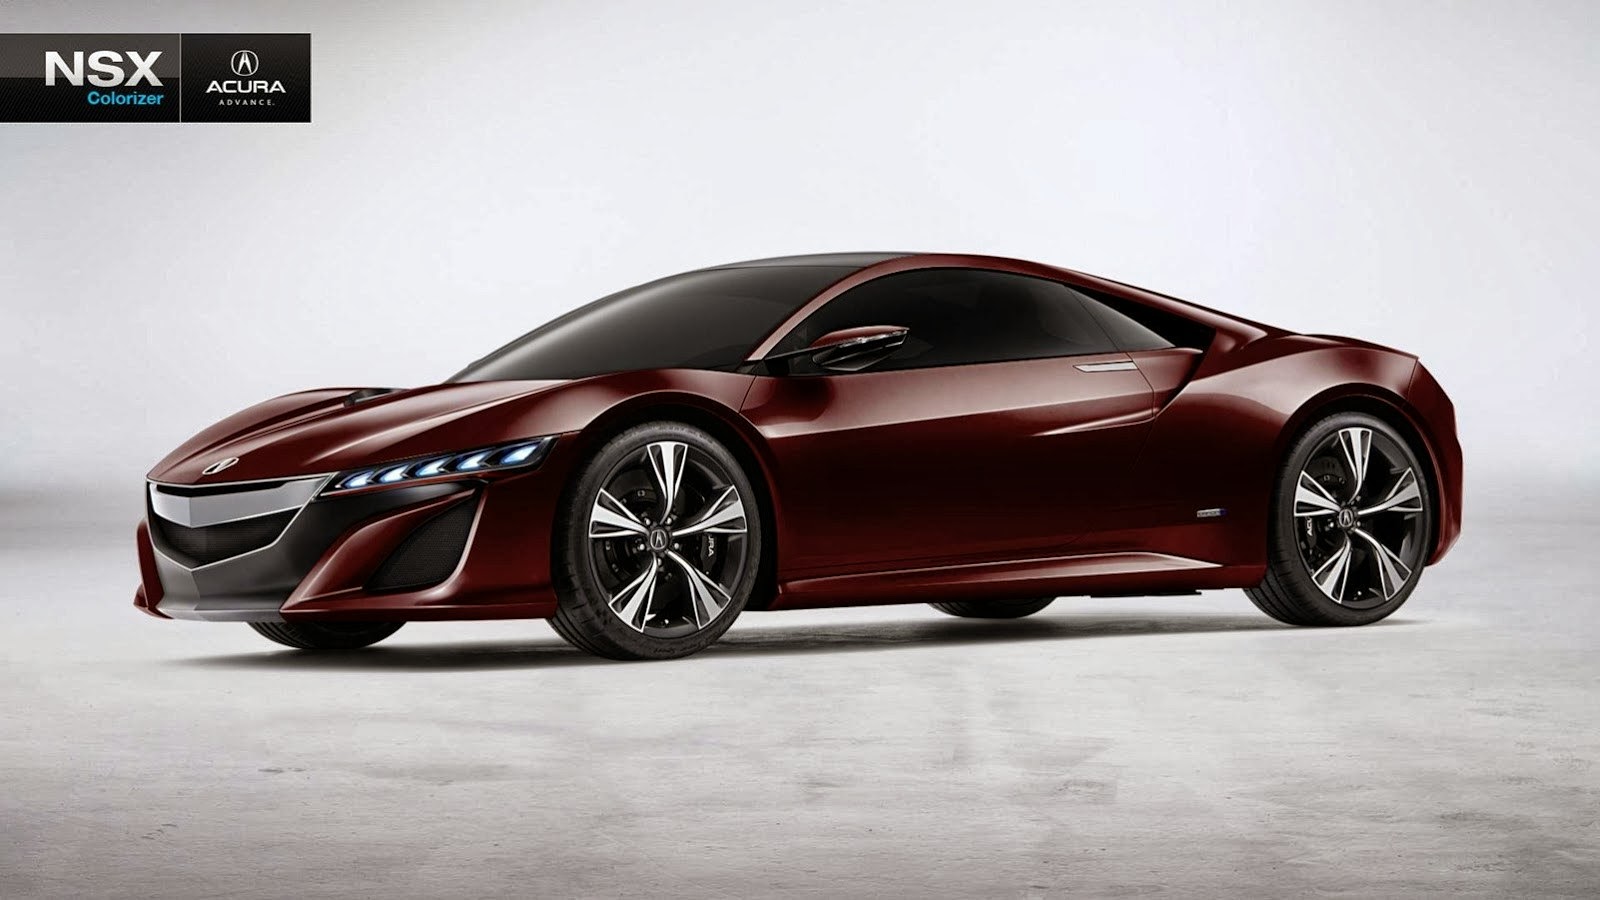 Acura Nsx Roadster Car Image HD